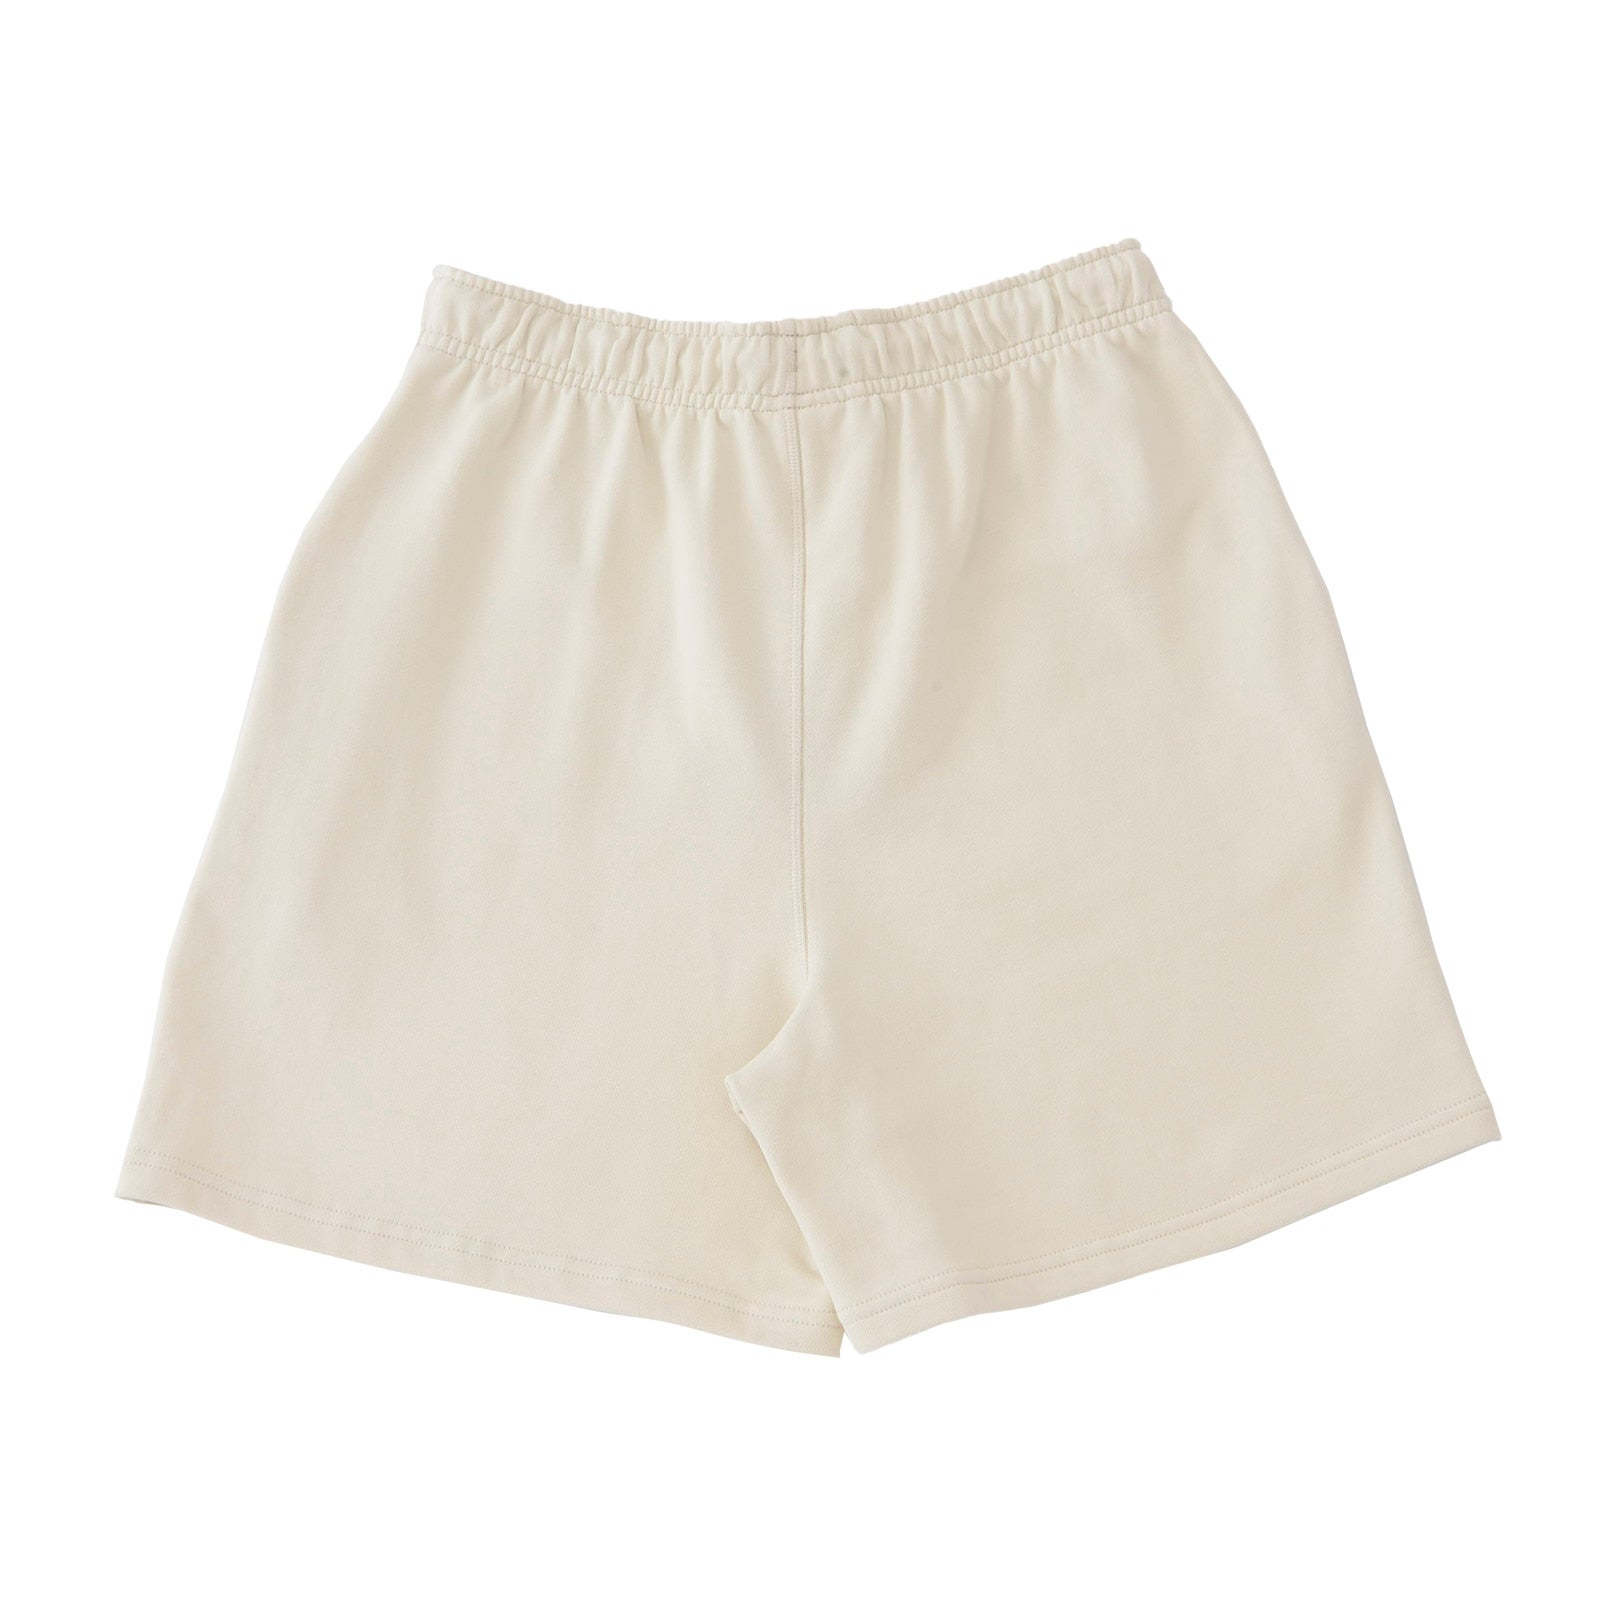 Athletics French Terry Shorts